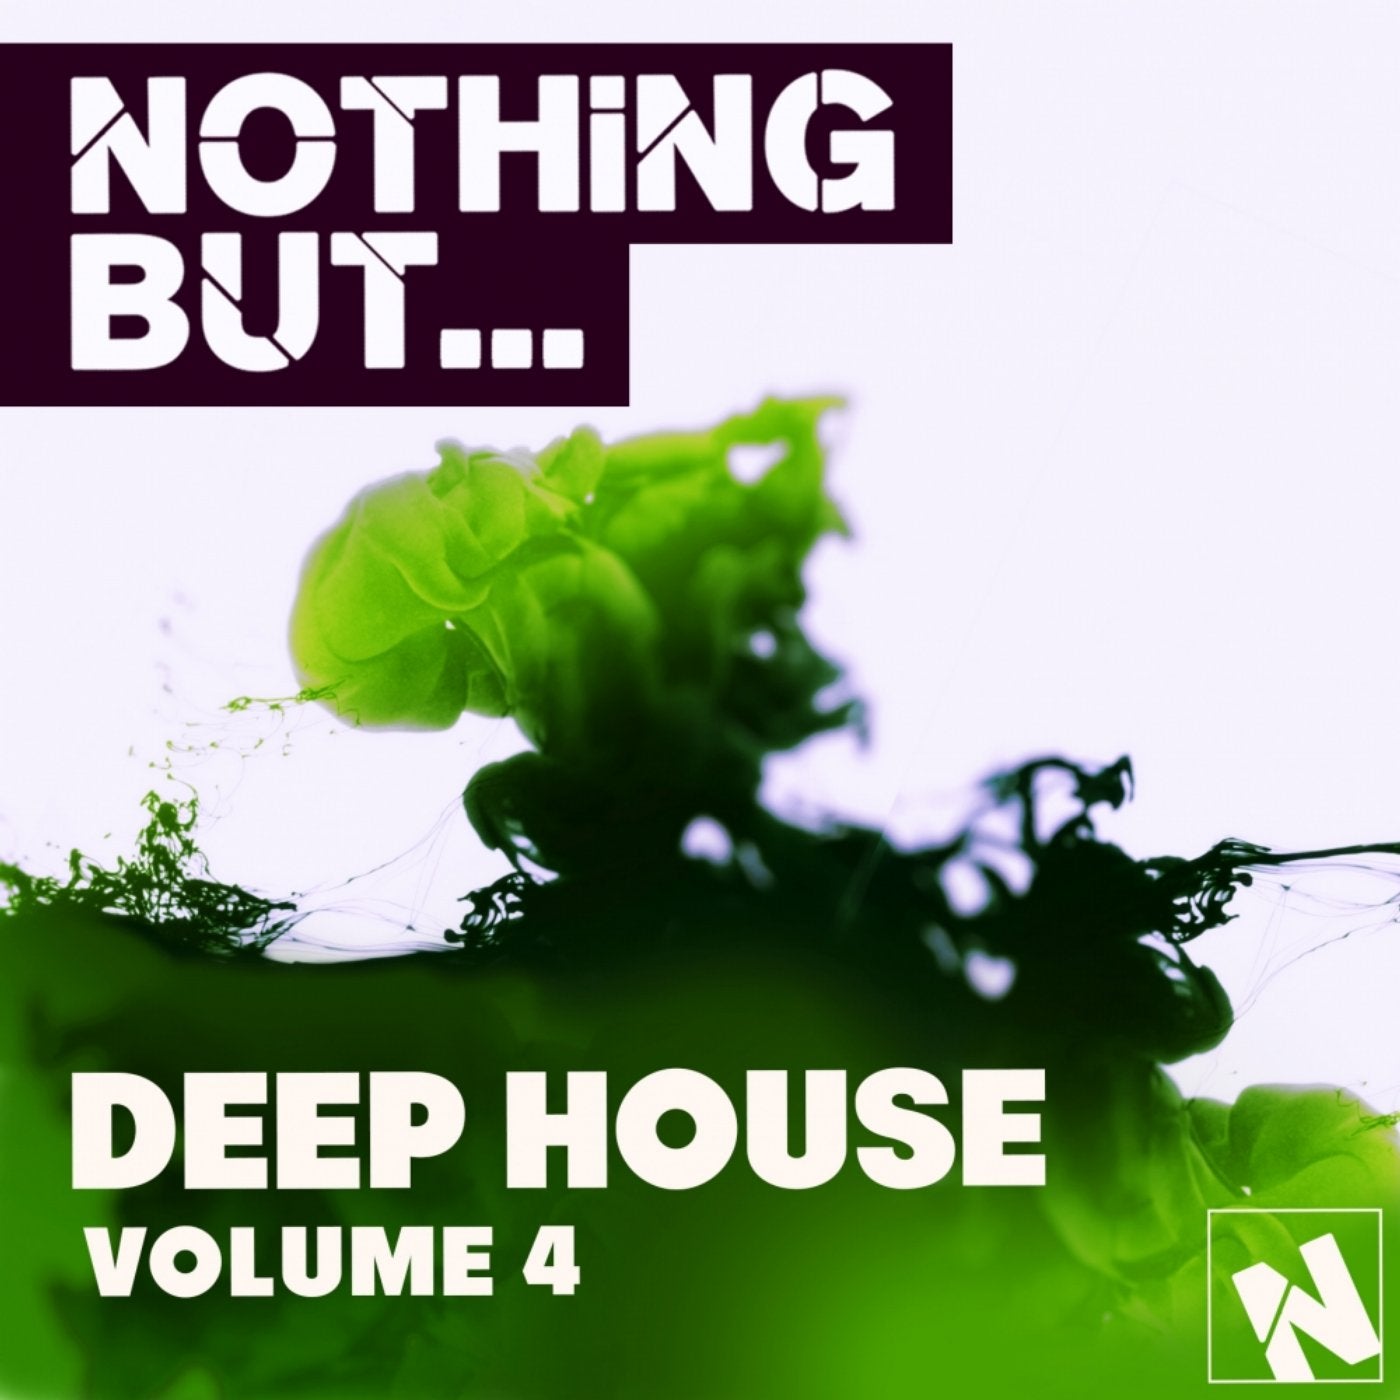 Nothing But... Deep House, Vol. 4